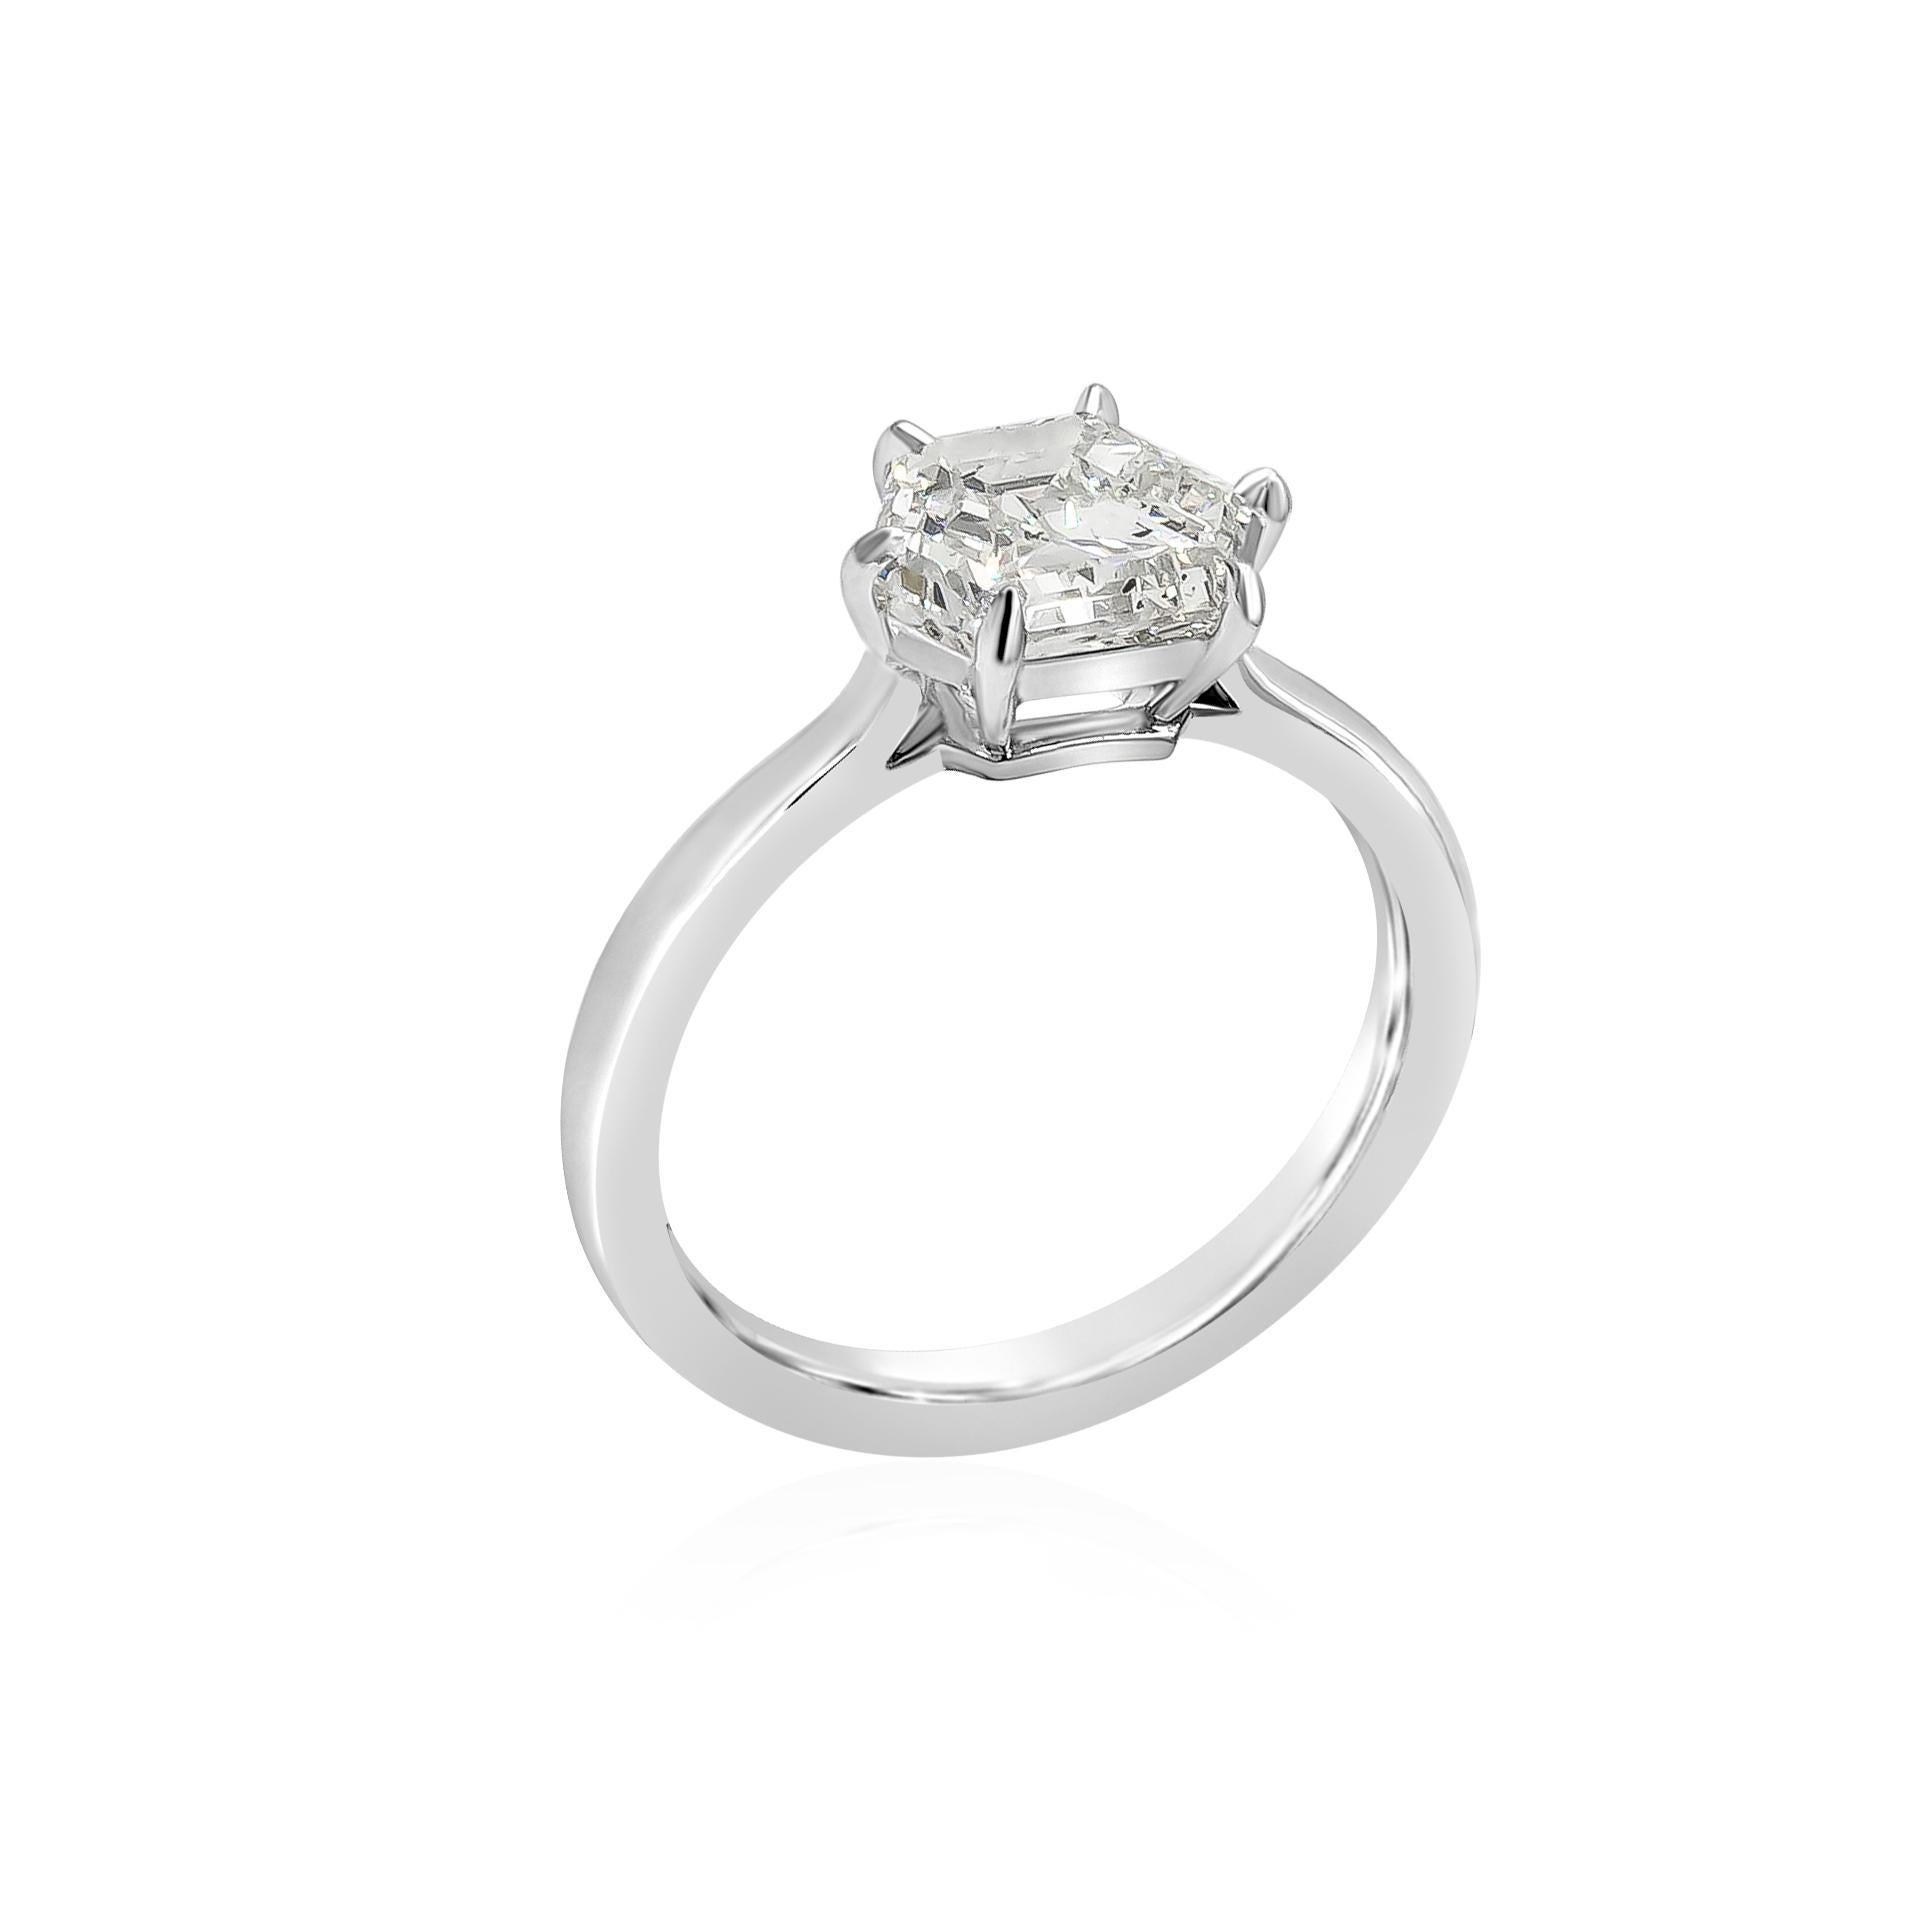 A well crafted engagement ring showcasing a 1.87 carats trapezoid diamond, set in a classic thin platinum mounting. GIA certified the diamond as K color, SI2 in clarity. Size 6.25 US, resizable upon request.

Style available in different price